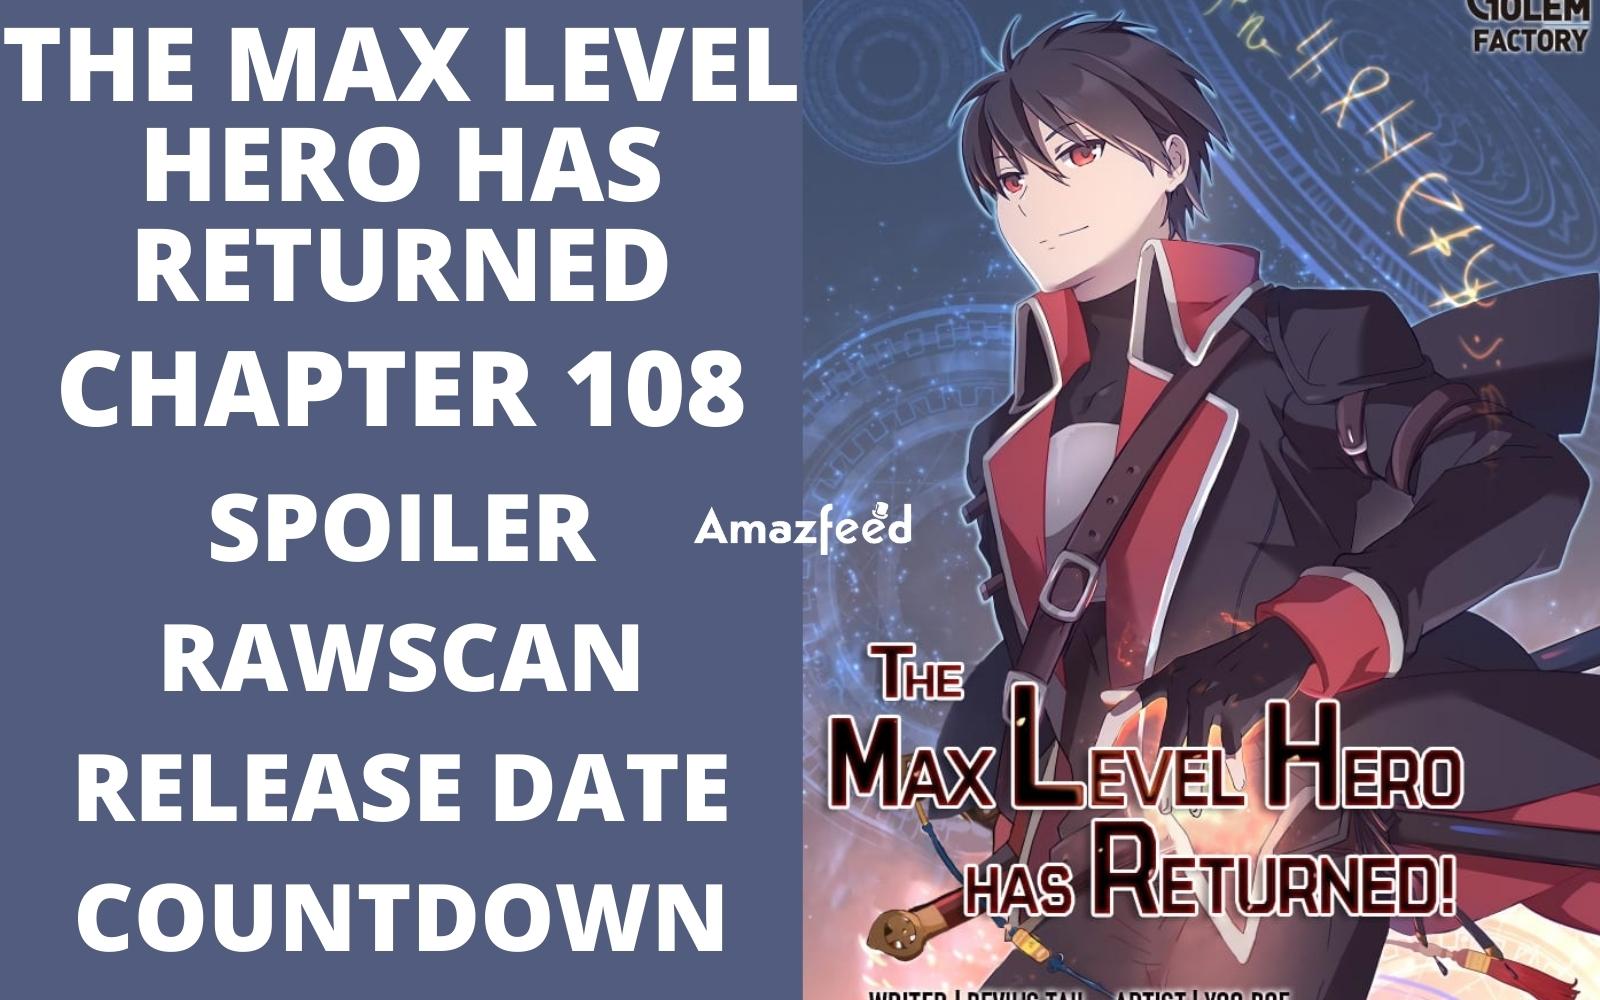 The Max Level Hero Has Returned Chapter 108 Spoiler, Release Date, Raw Scan, Countdown, Color Page